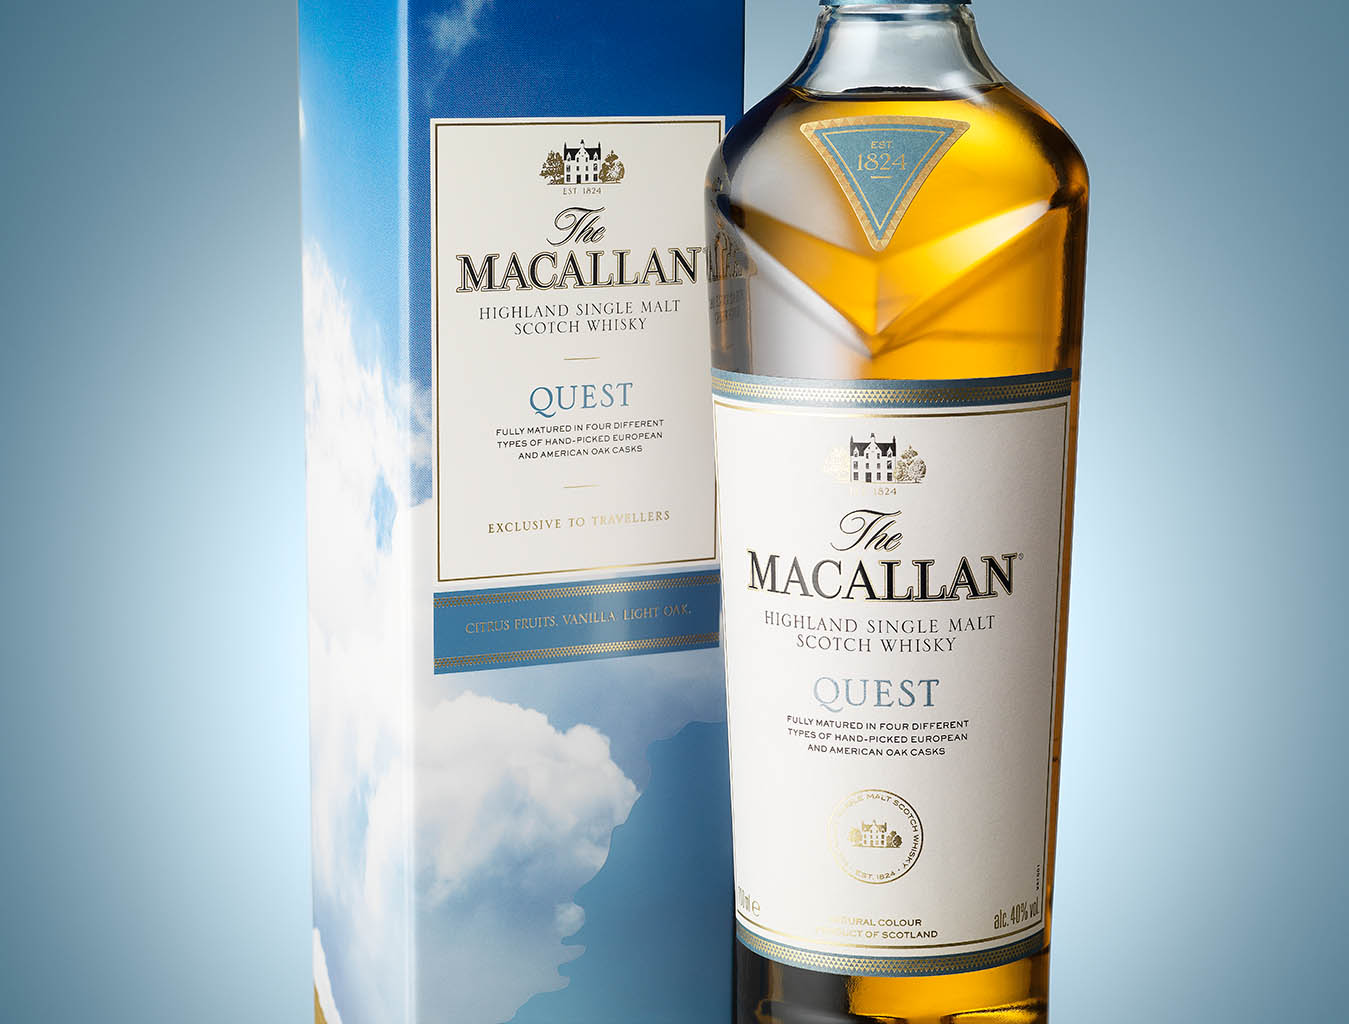 Drinks Photography of Macallan whisky bottle and box set by Packshot Factory